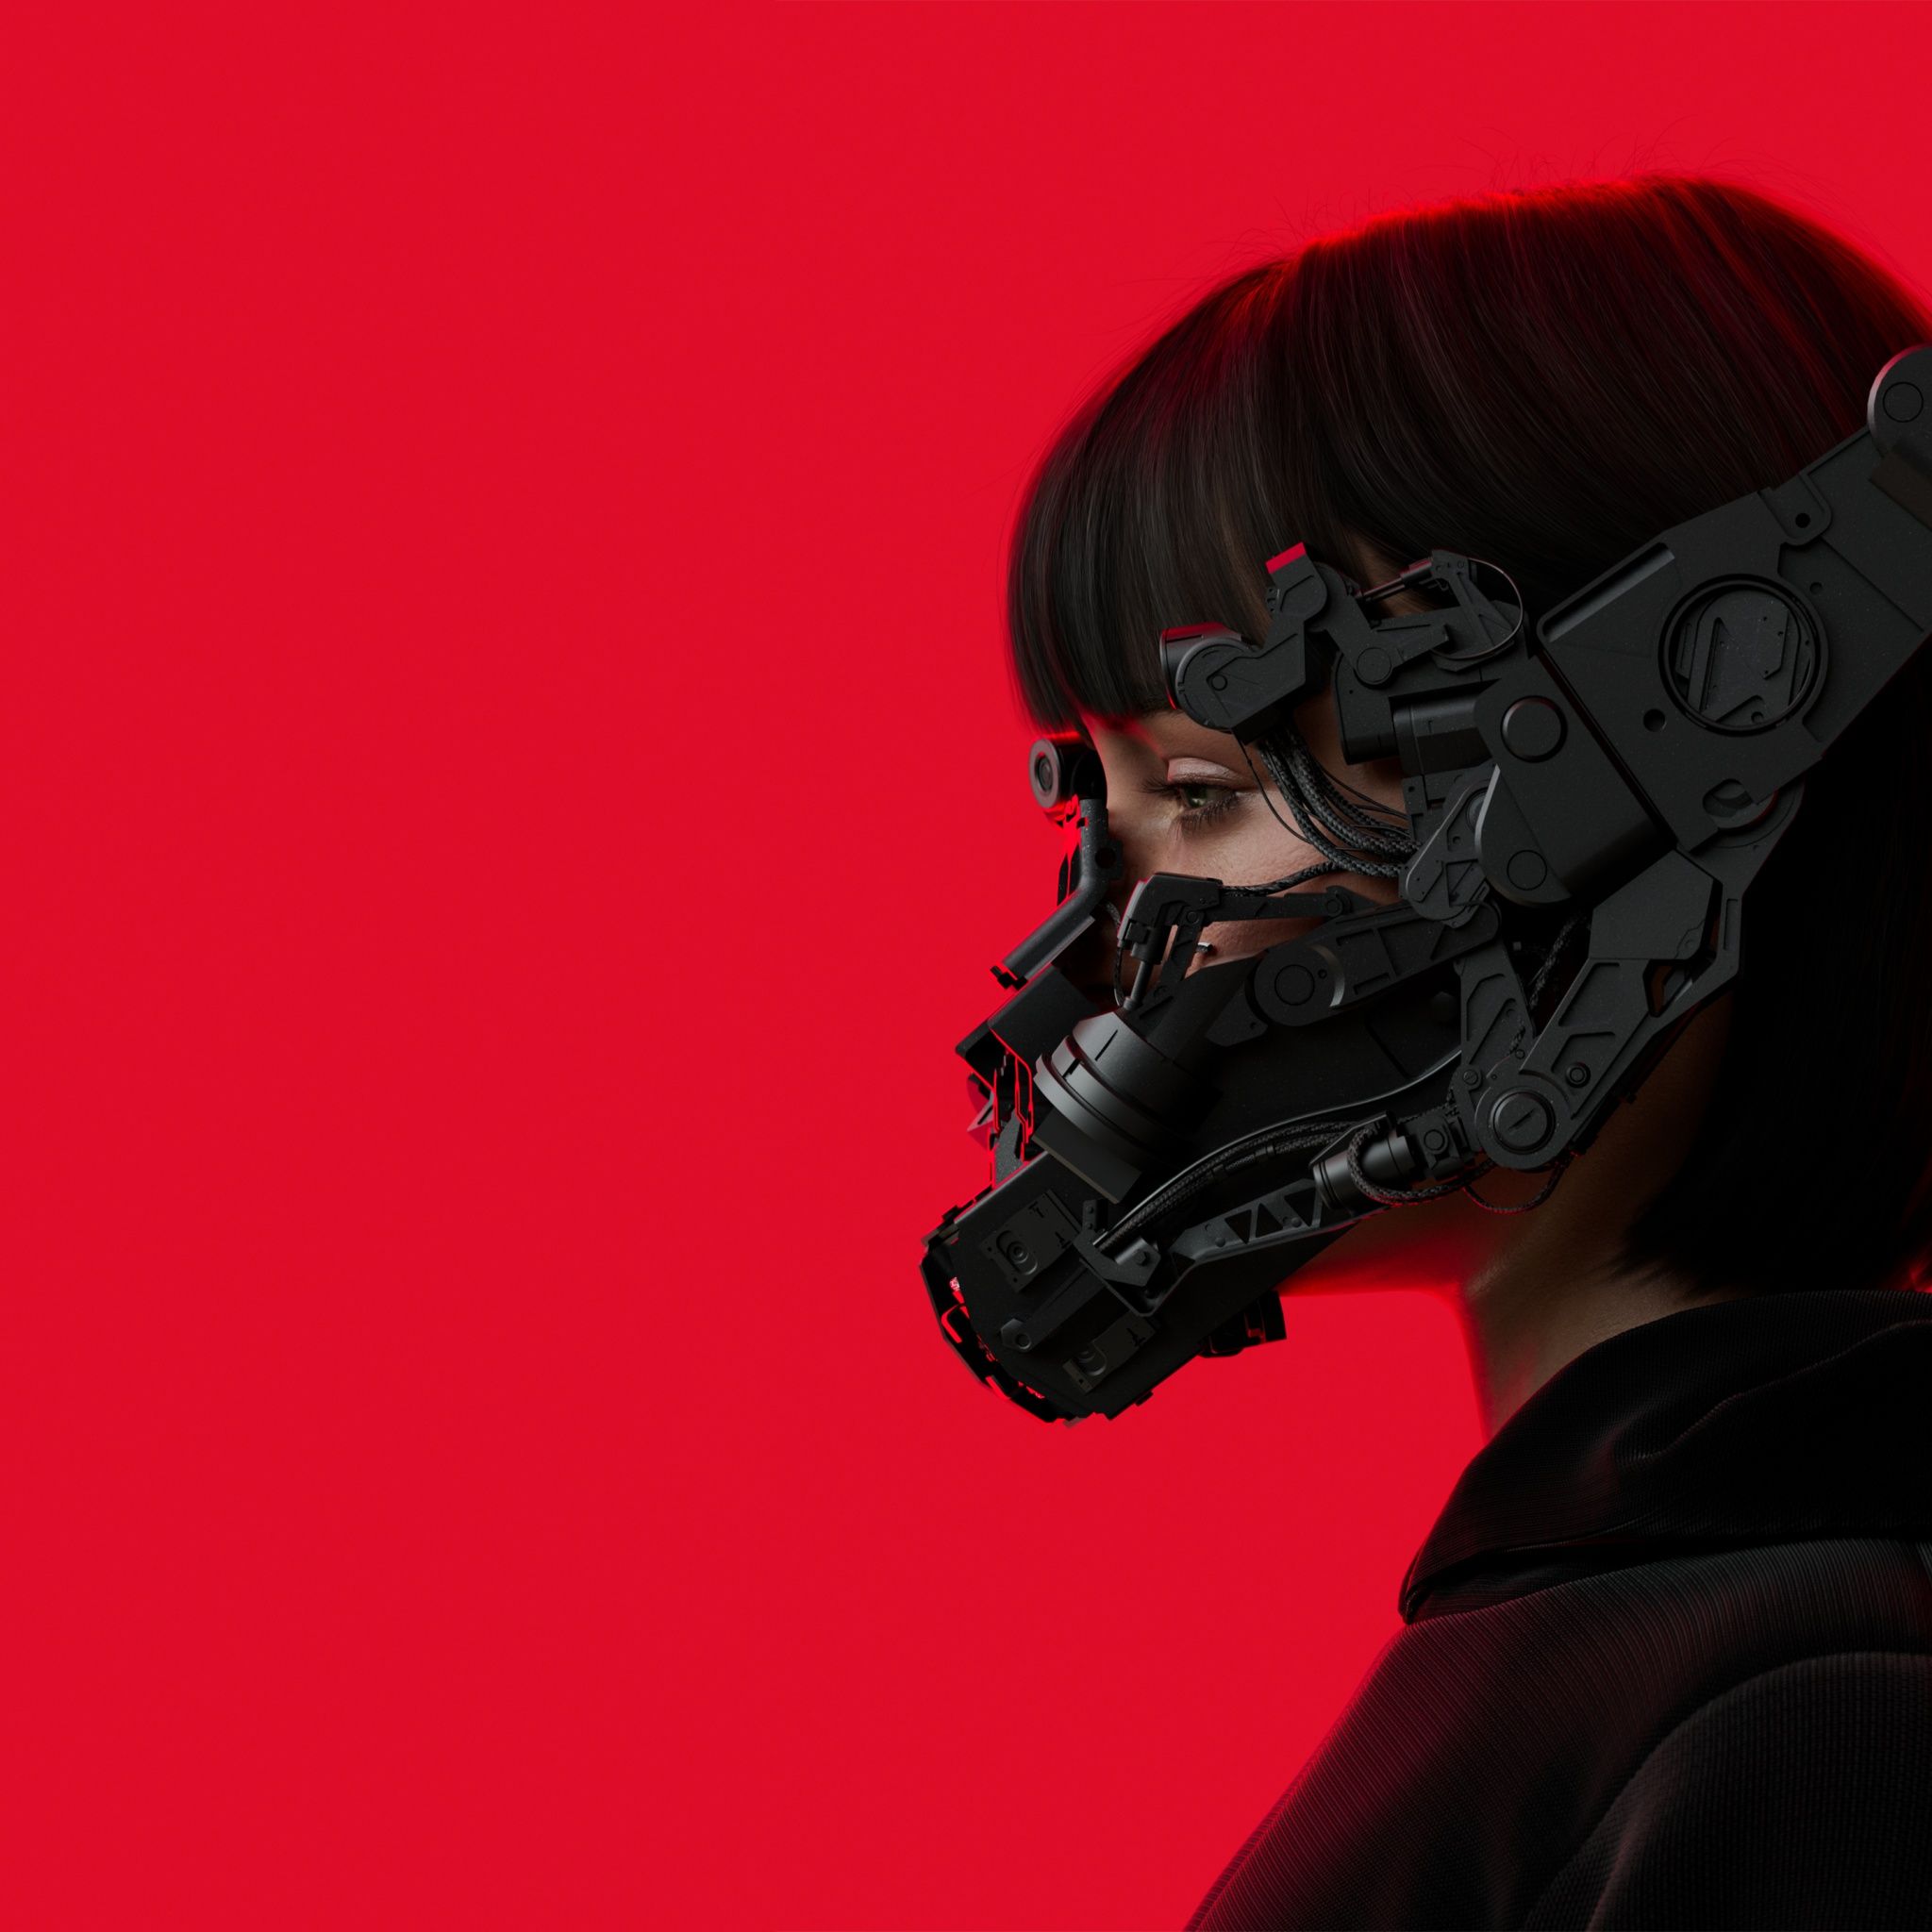 Profile of a woman wearing a futuristic gas mask with a red background - Cyberpunk